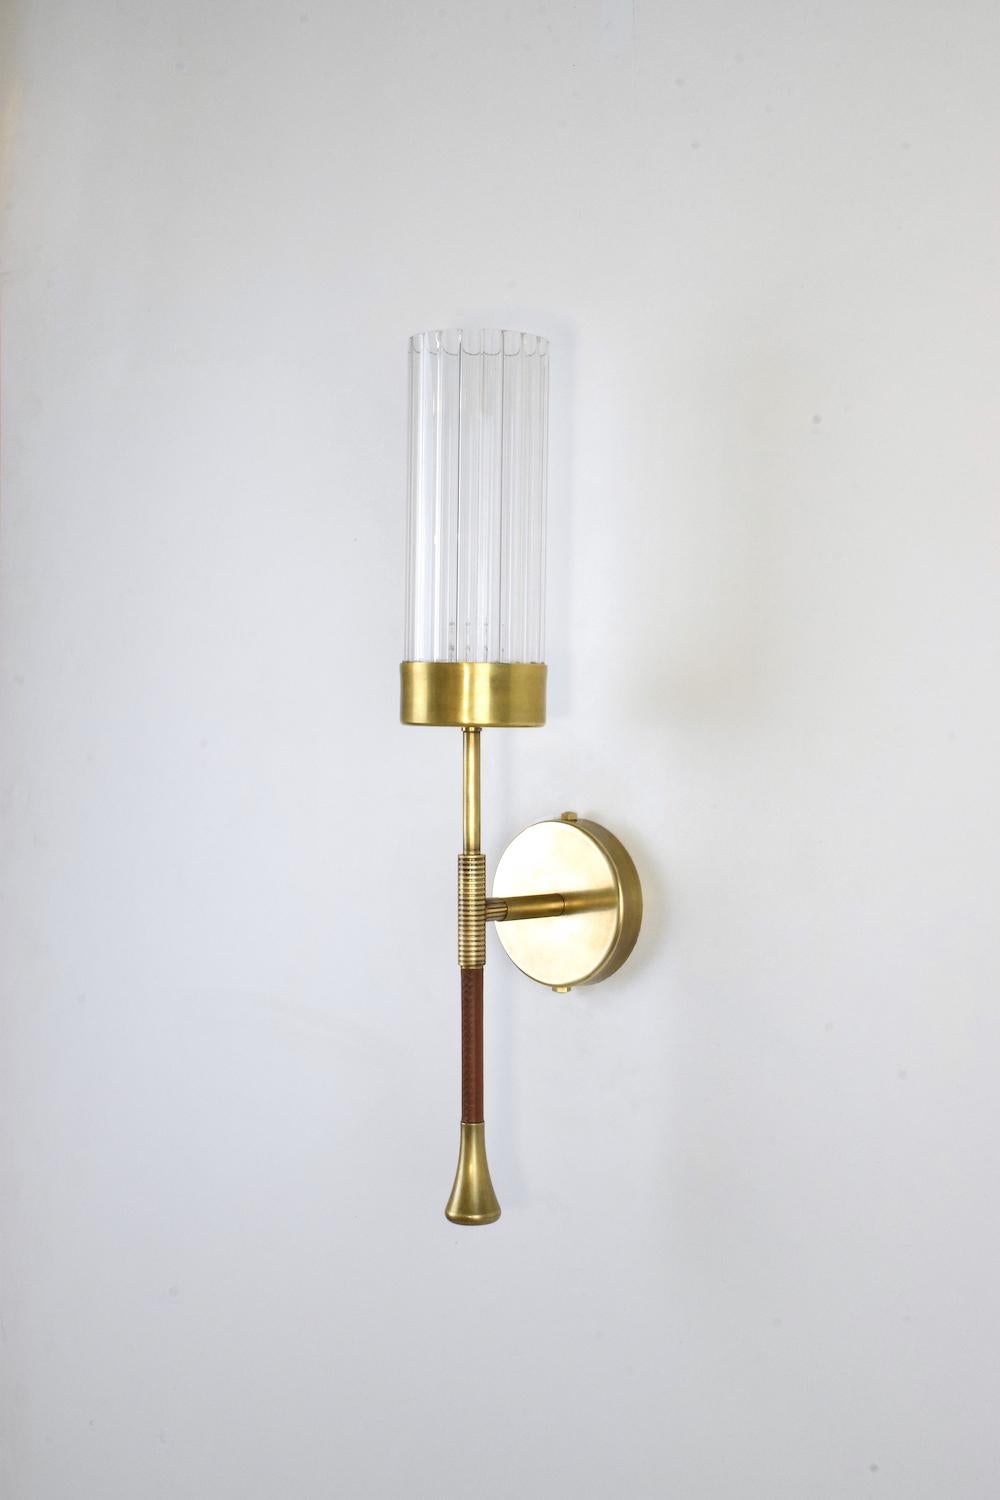 DAYA-W1M Brass Modern Engraved Wall Light, Flow 2 Collection In New Condition For Sale In Paris, FR